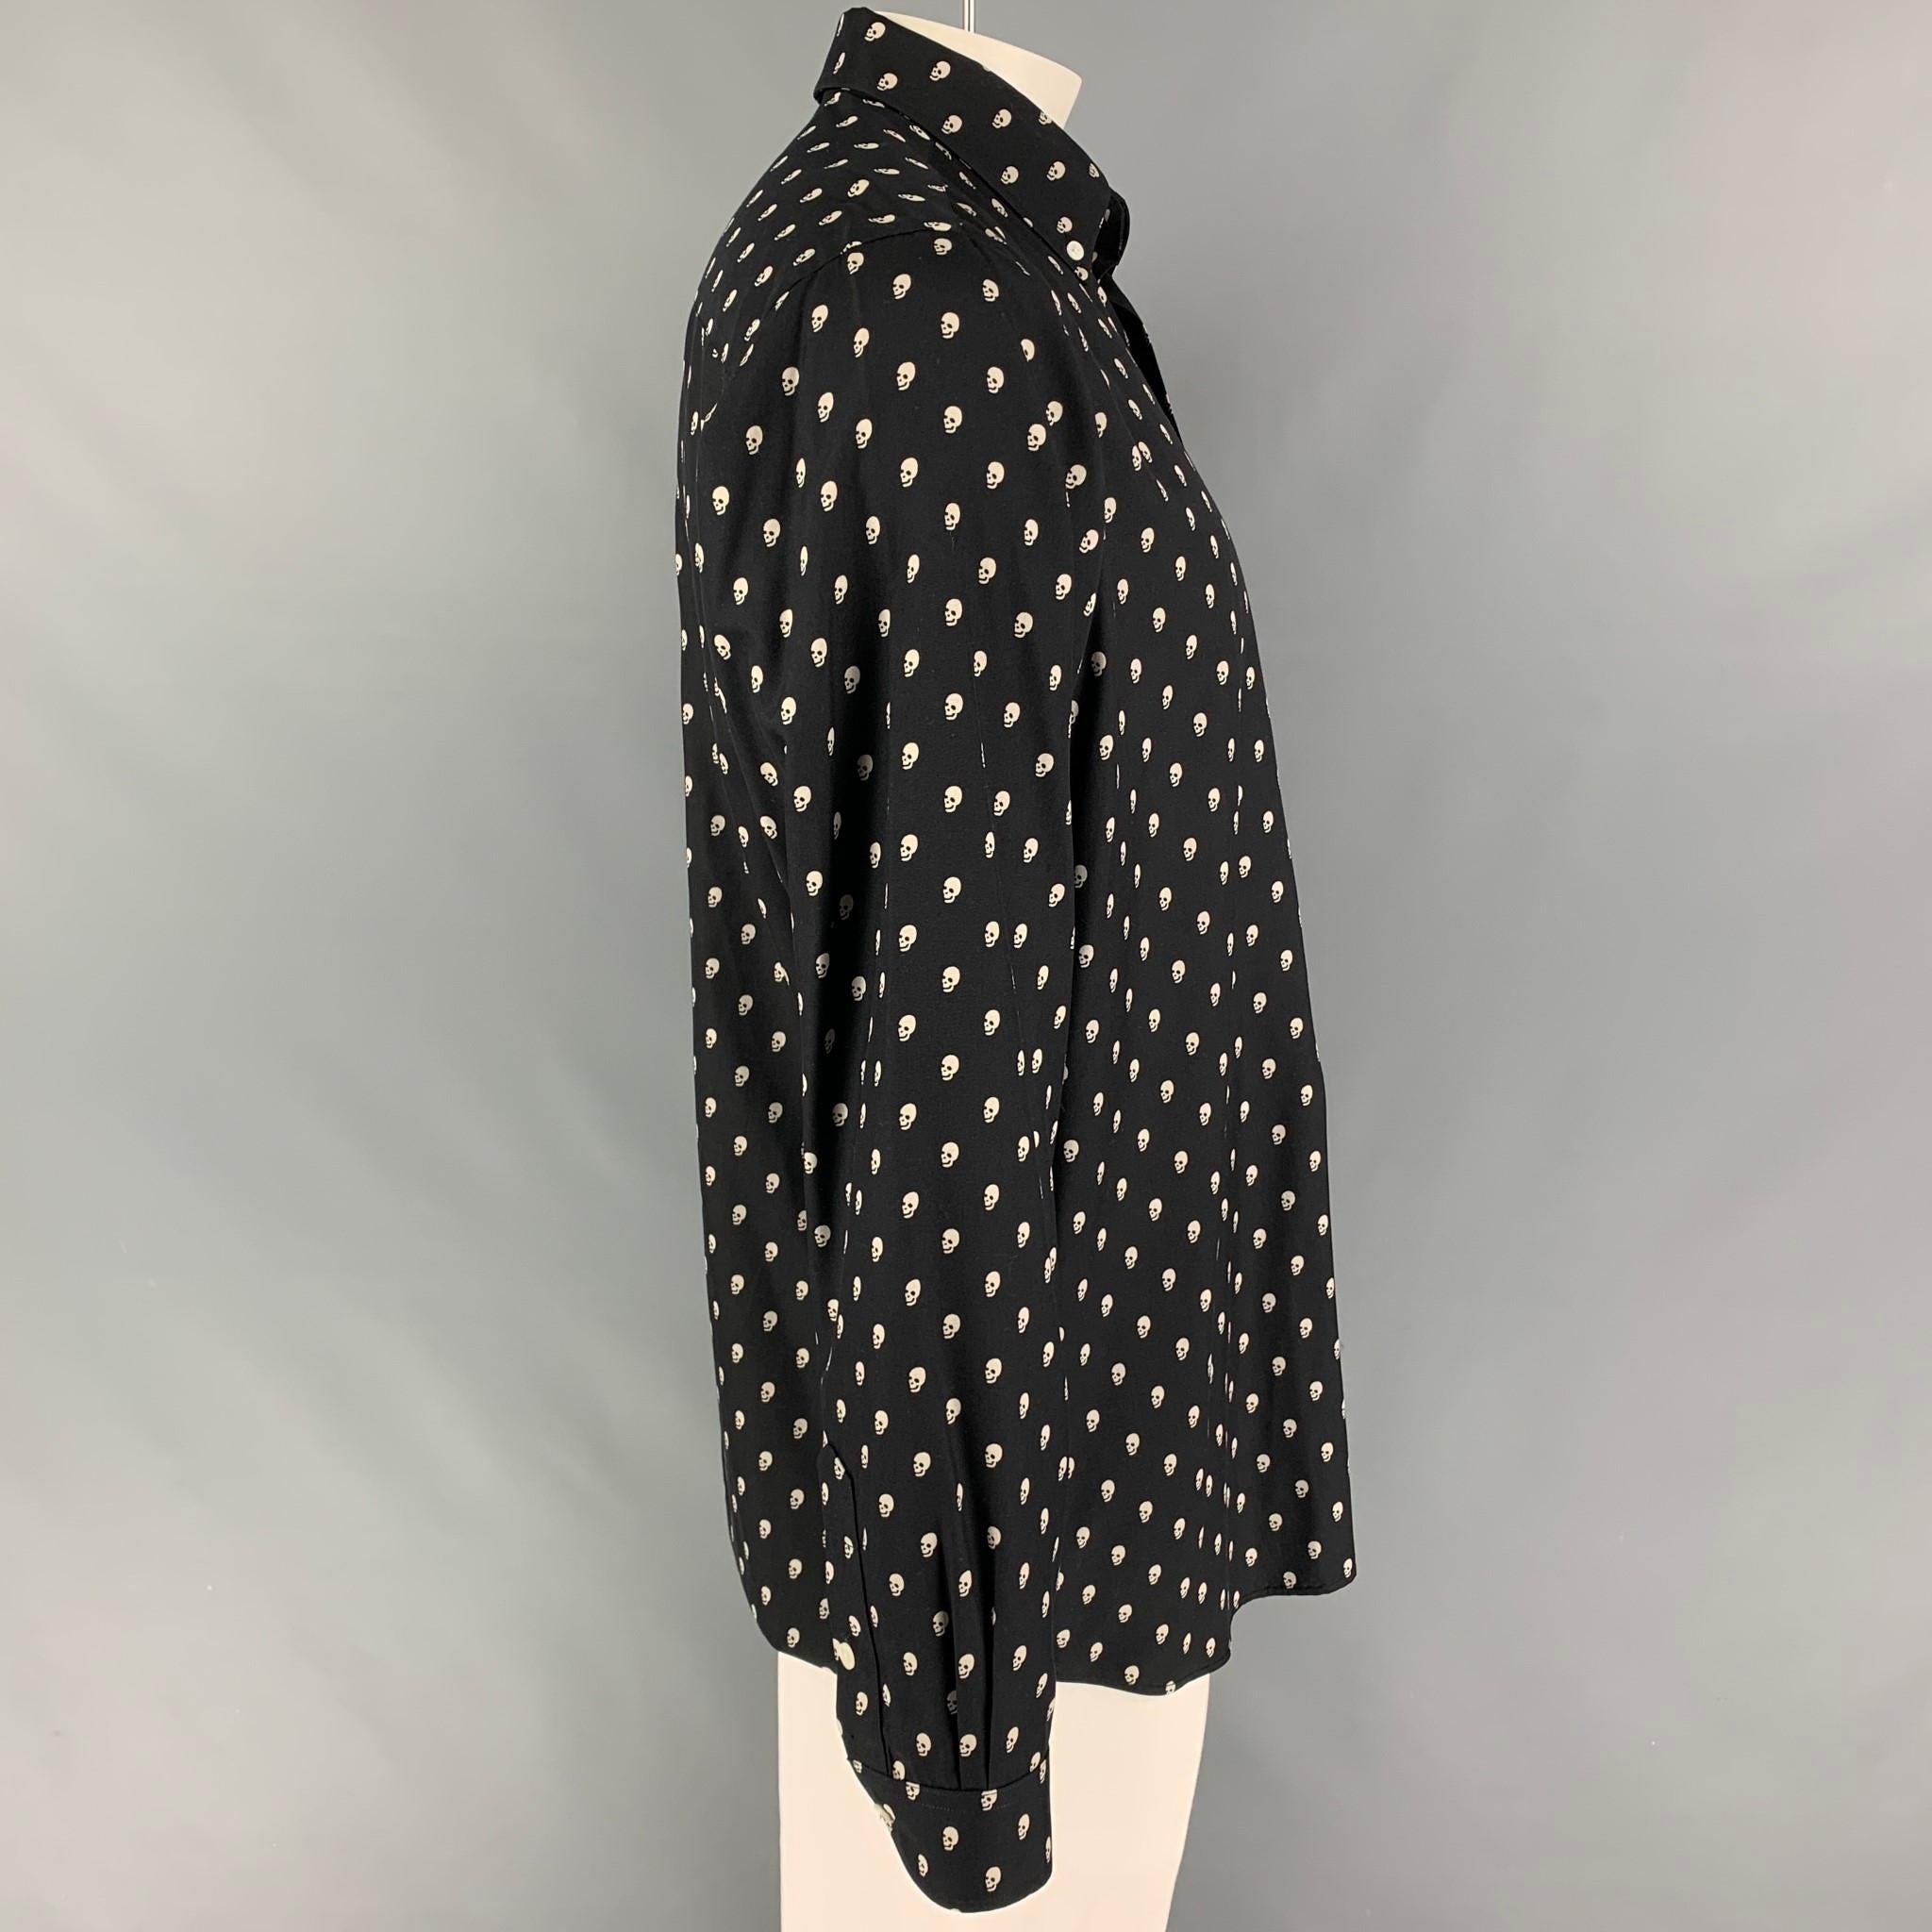 R13 long sleeve shirt comes in a black & white skull print silk featuring a button down collar, patch pocket, and a button up closure. Made in USA.

Excellent Pre-Owned Condition.
Marked: L

Measurements:

Shoulder: 19 in.
Chest: 48 in.
Sleeve: 27.5